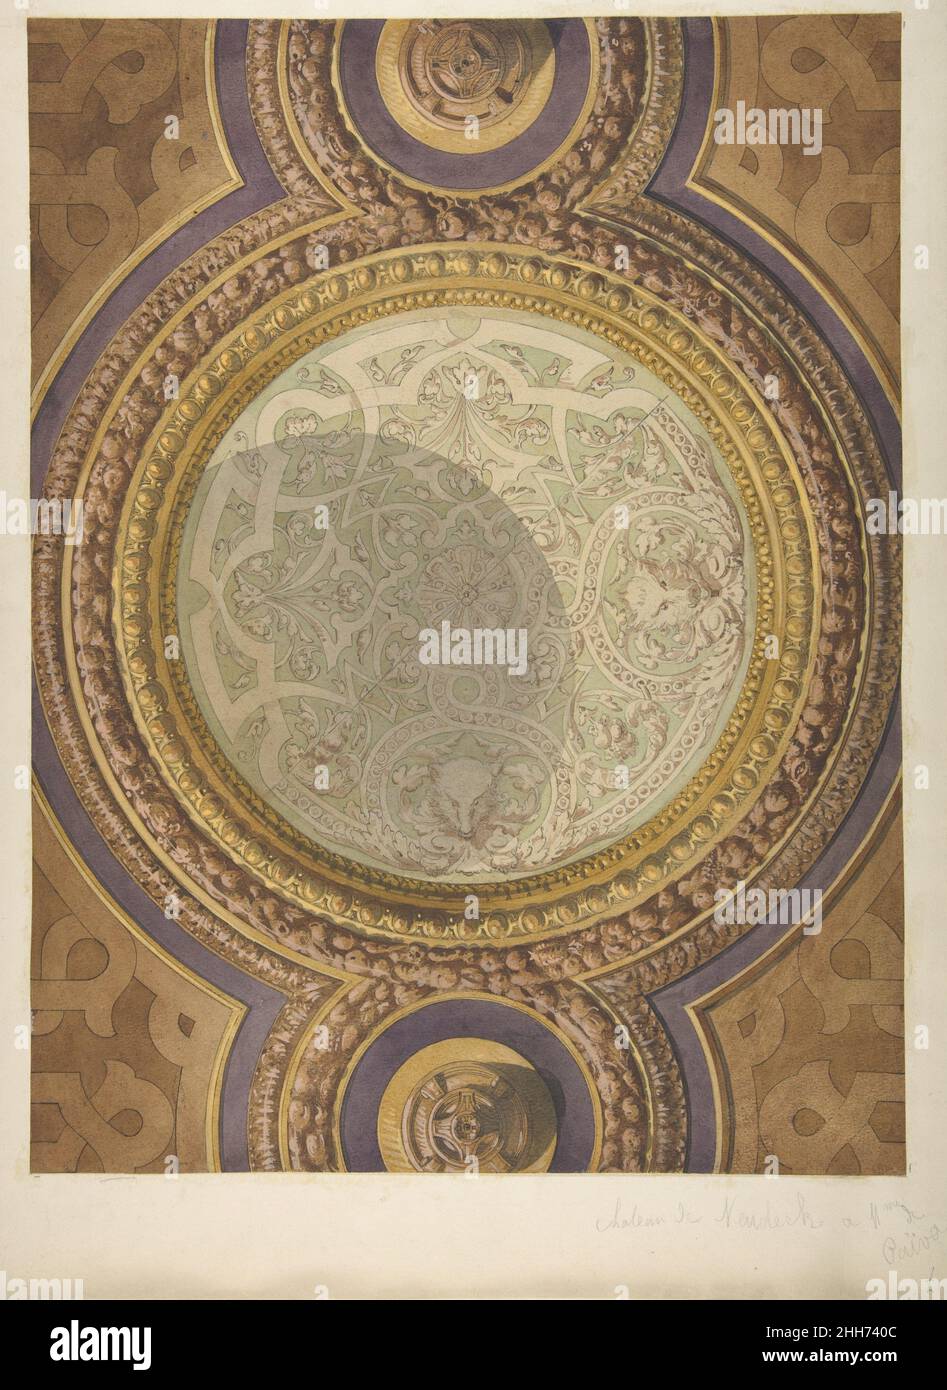 Design for Domed Ceiling for Mme Païva's Chateau at Neudeck ca. 1877–84 Jules-Edmond-Charles Lachaise French This beautiful design combines various 16th century ornaments in a monumental domed ceiling. It was designed by the Parisian architectural firm Lachaise and Gourdet which specialized in the interior decoration of upper-class houses and palaces from the 1840s until the last quarter of the 19th century. The design was part of their commission for the illustrious courtesan known as ‘La Paiva’ who had worked her way up in society through several advantageous marriages. Her last husband, Cou Stock Photo